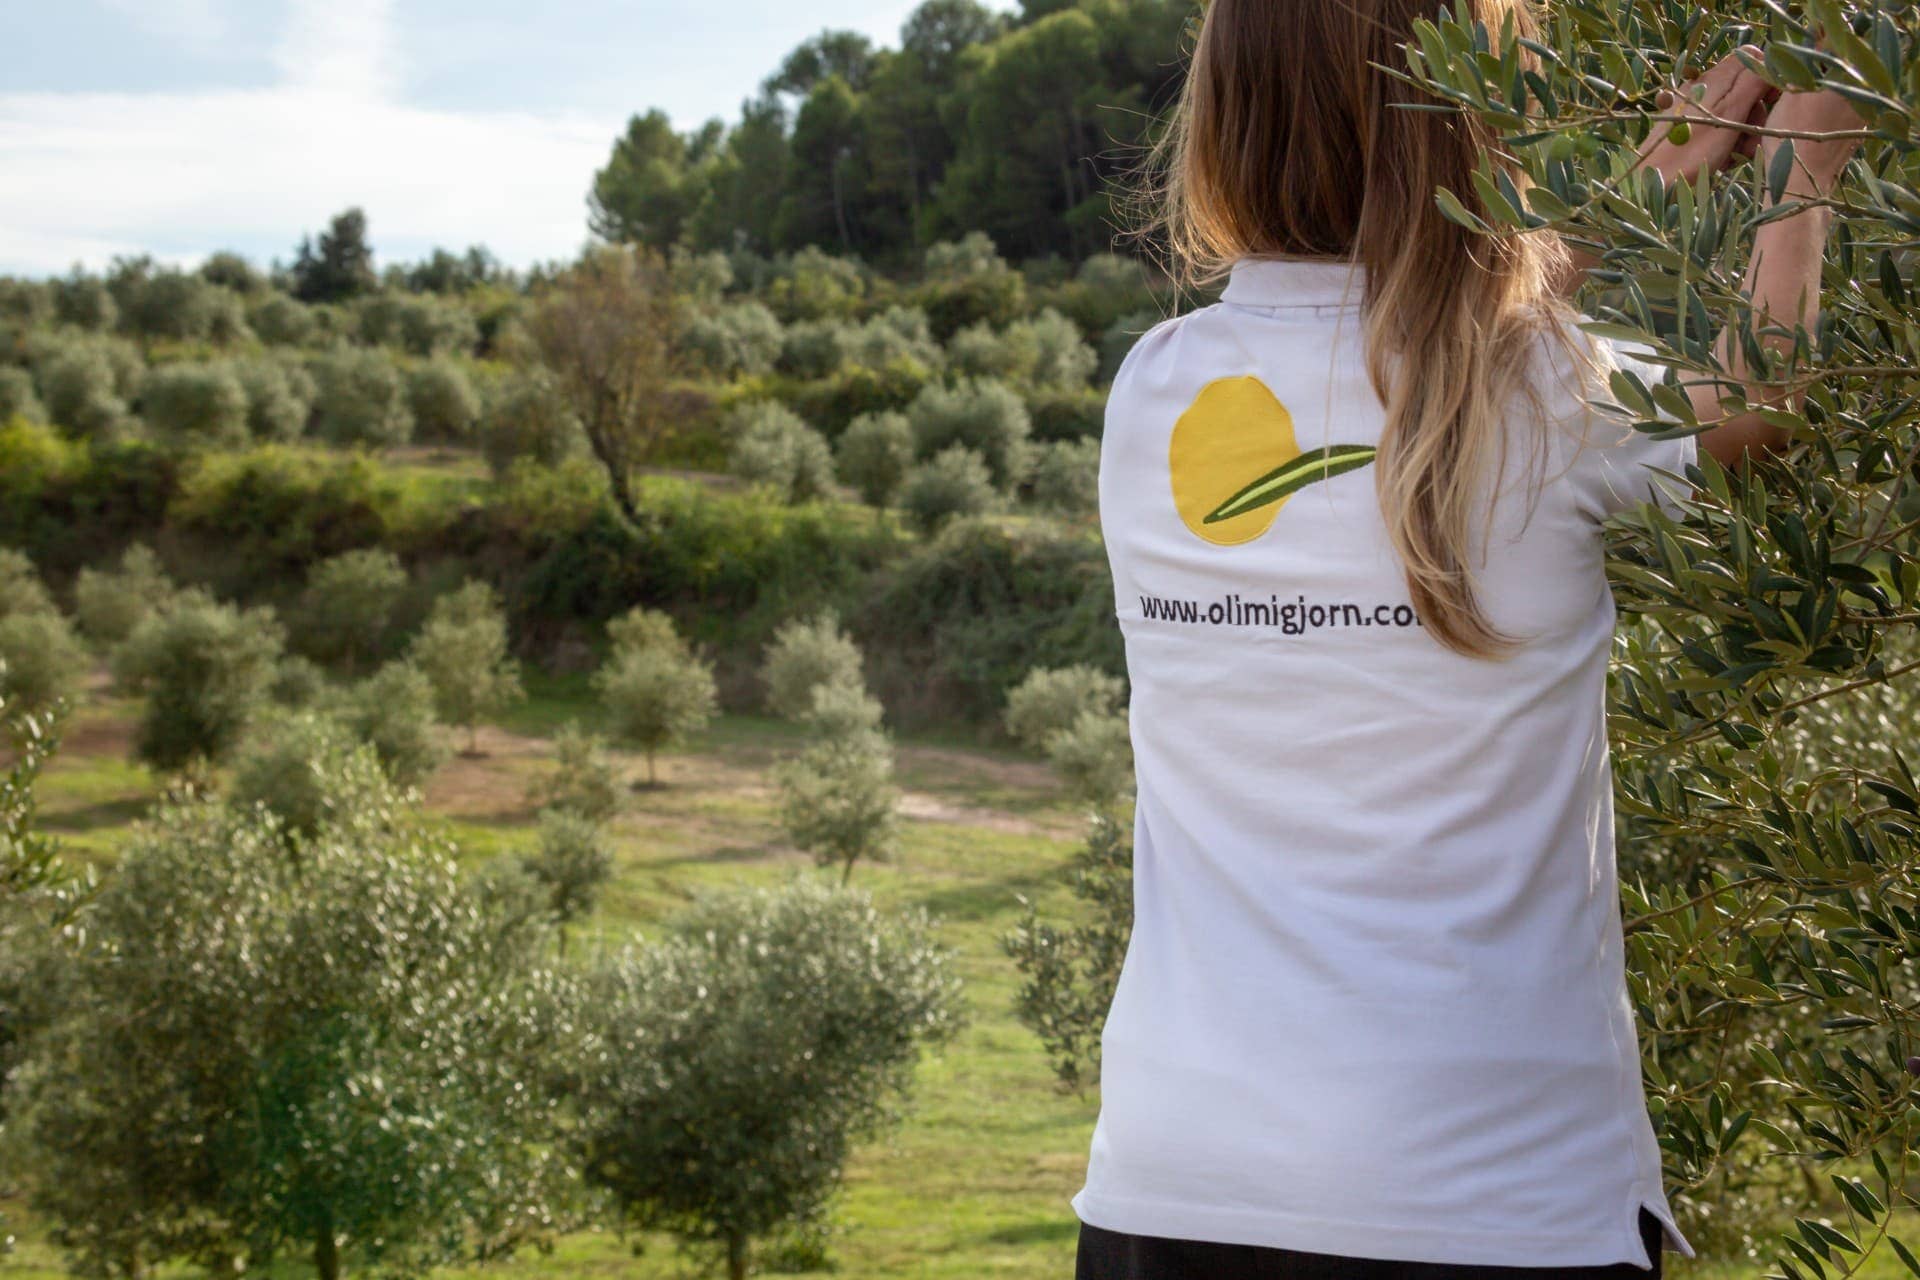 europe-the-best-olive-oils-competitions-production-spanish-producers-achieve-record-success-at-world-competition-olive-oil-times